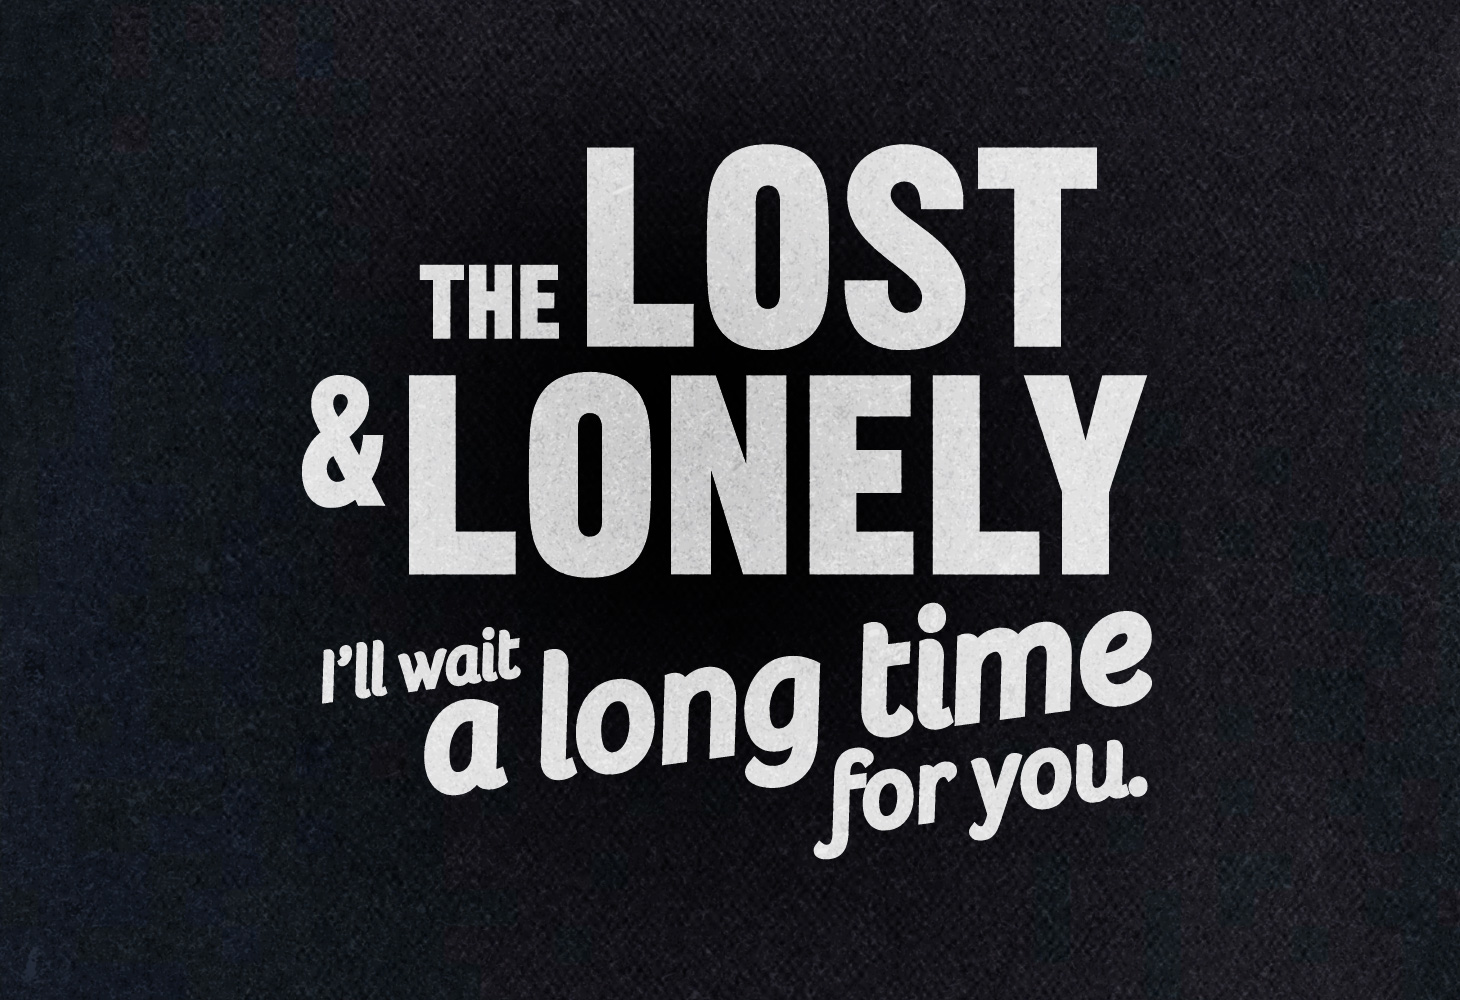 The Lost & Lonely